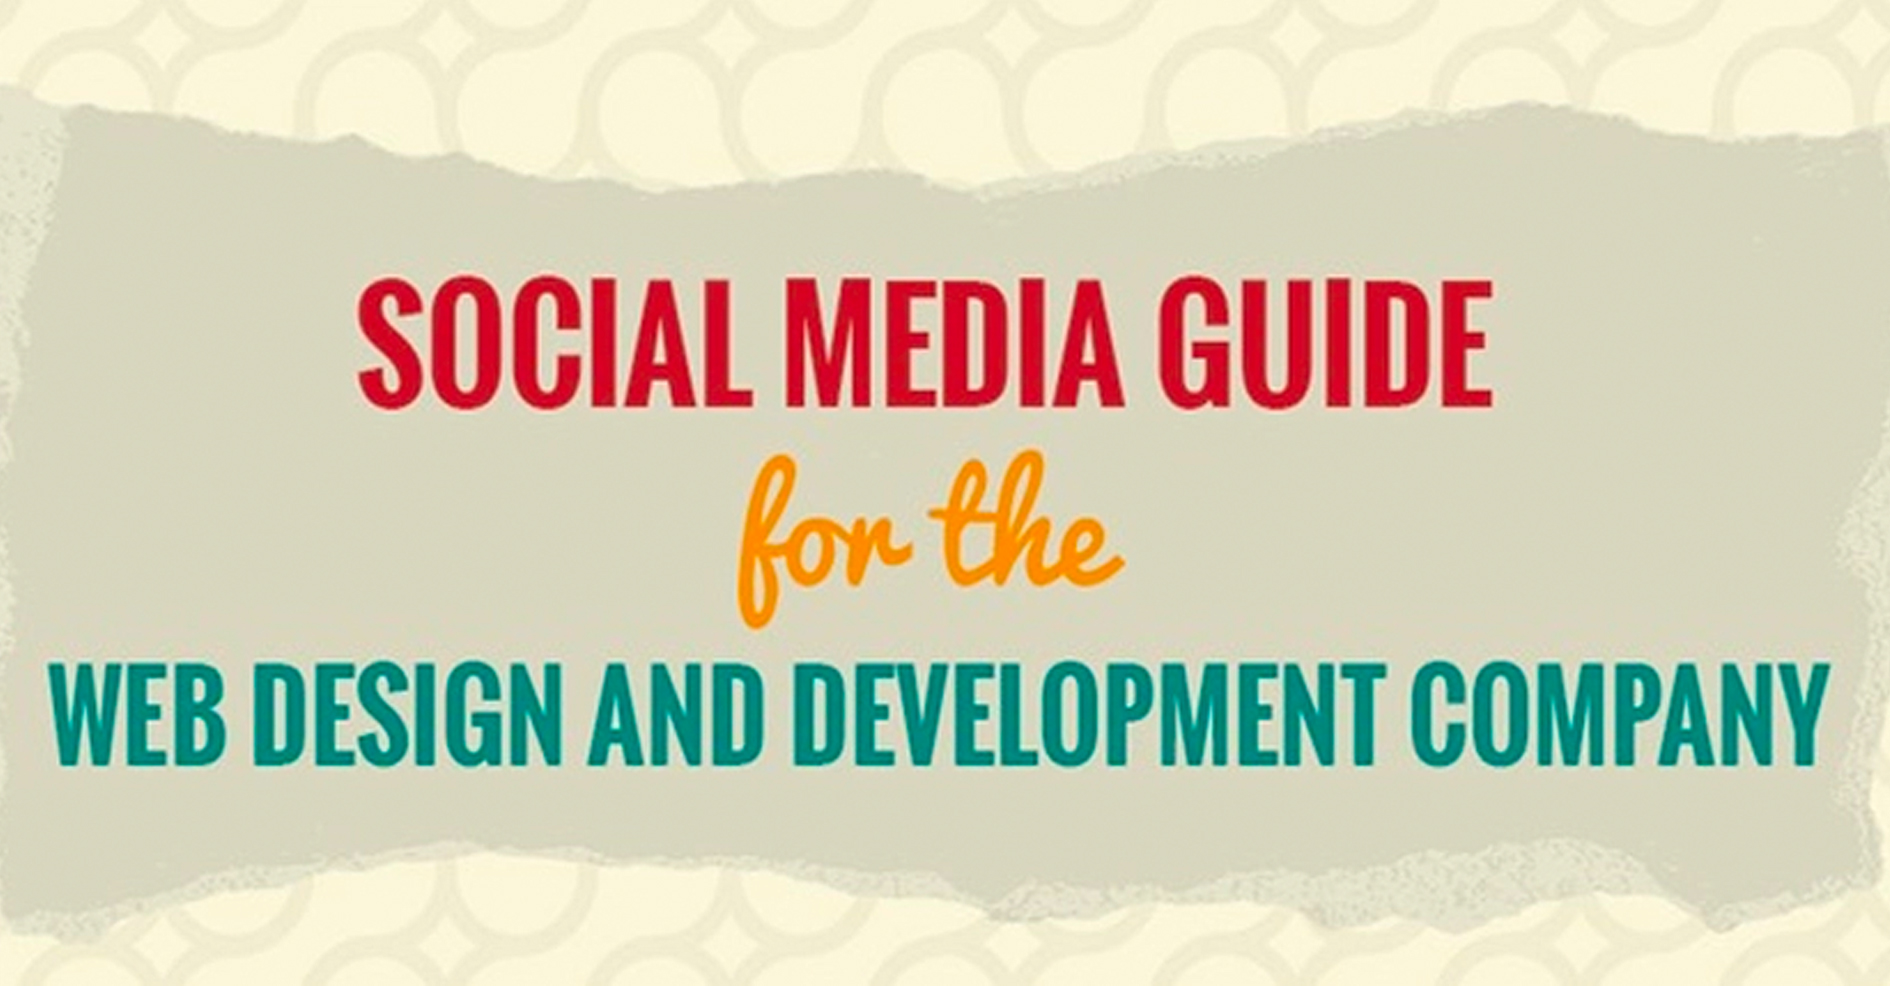 Infographic: Social Media Guide for the Web Design and Development Company